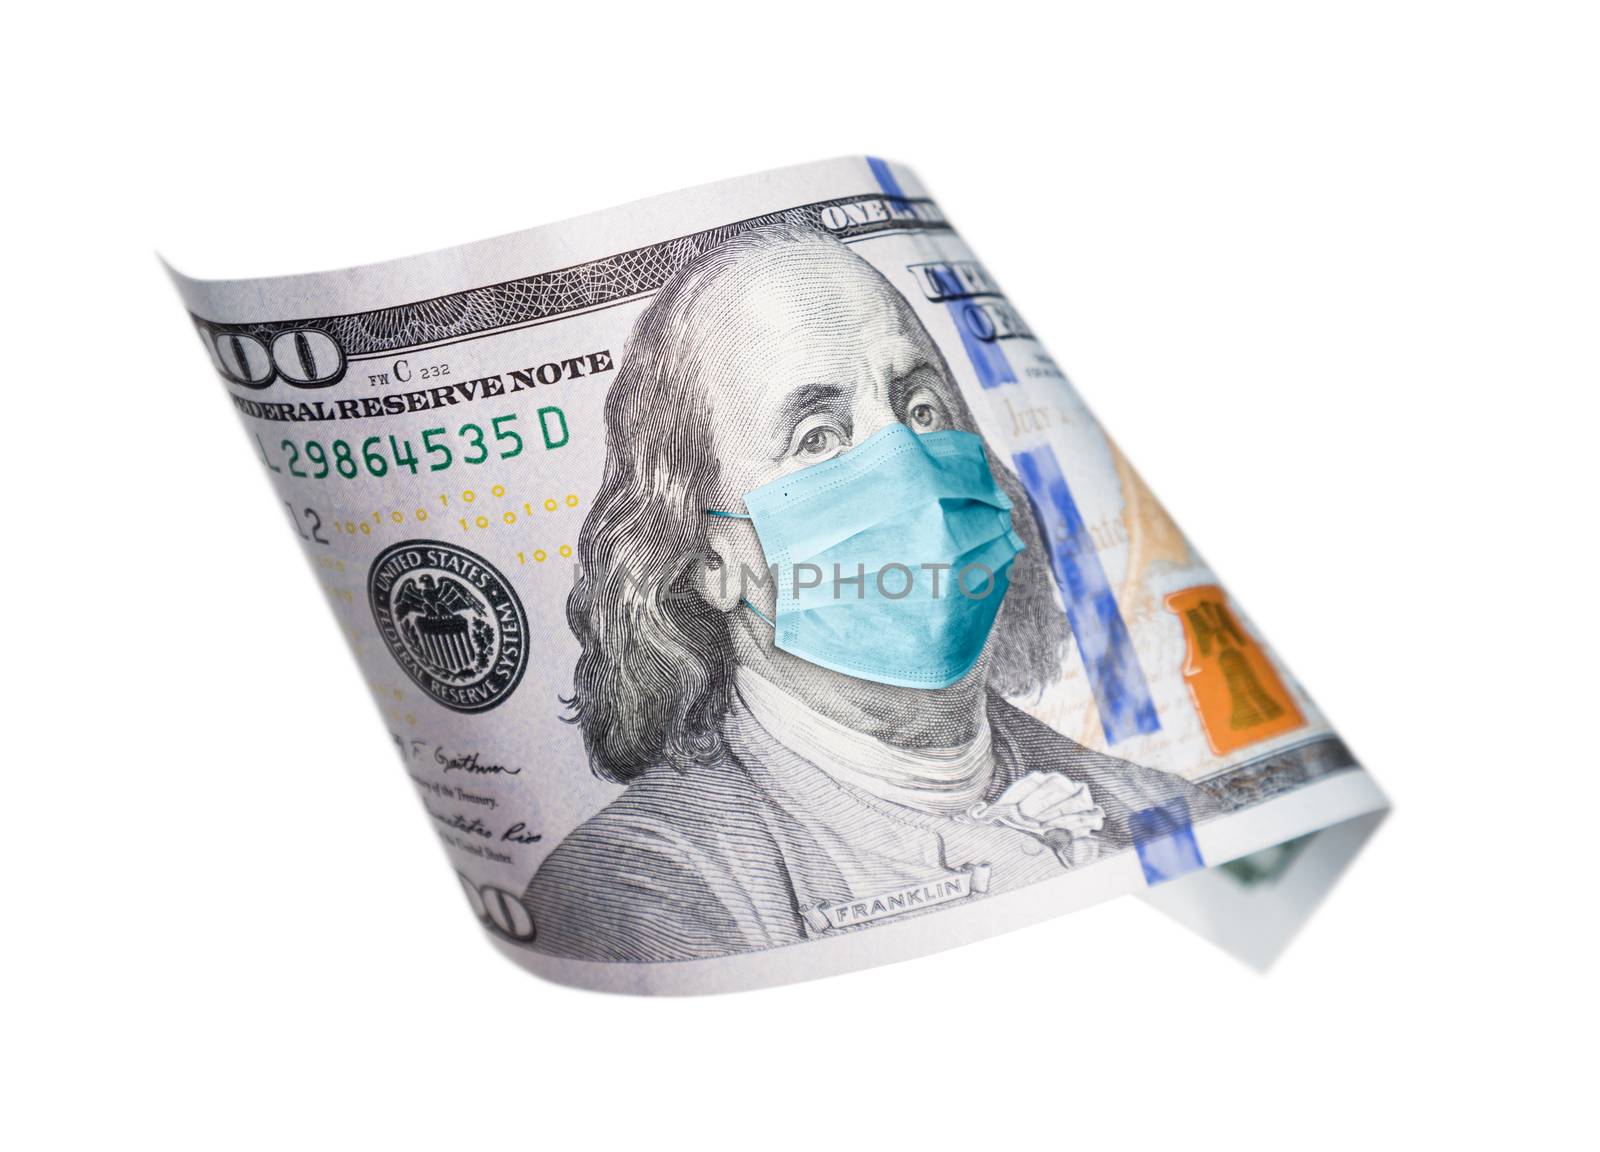 One Hundred Dollar Bill With Medical Face Mask on Benjamin Franklin Isolated on White. by Feverpitched